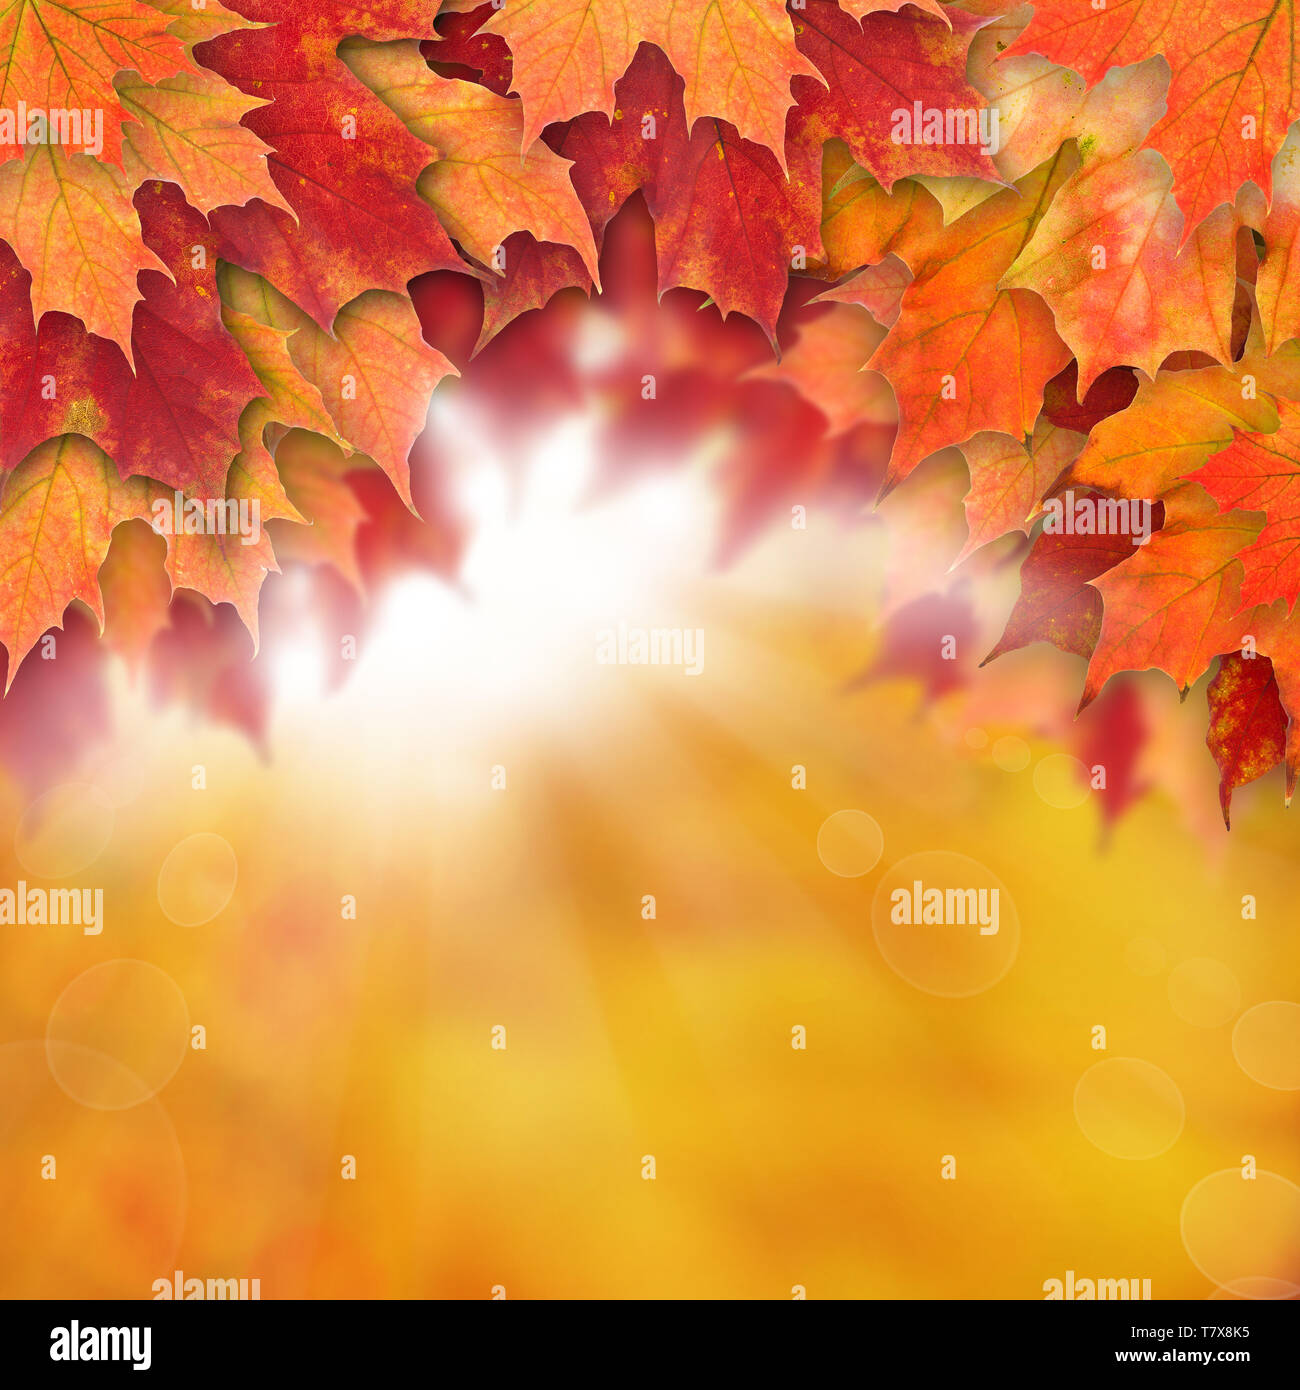 Autumn background with leaves. Colorful fall leaves and abstract gold bokeh light Stock Photo